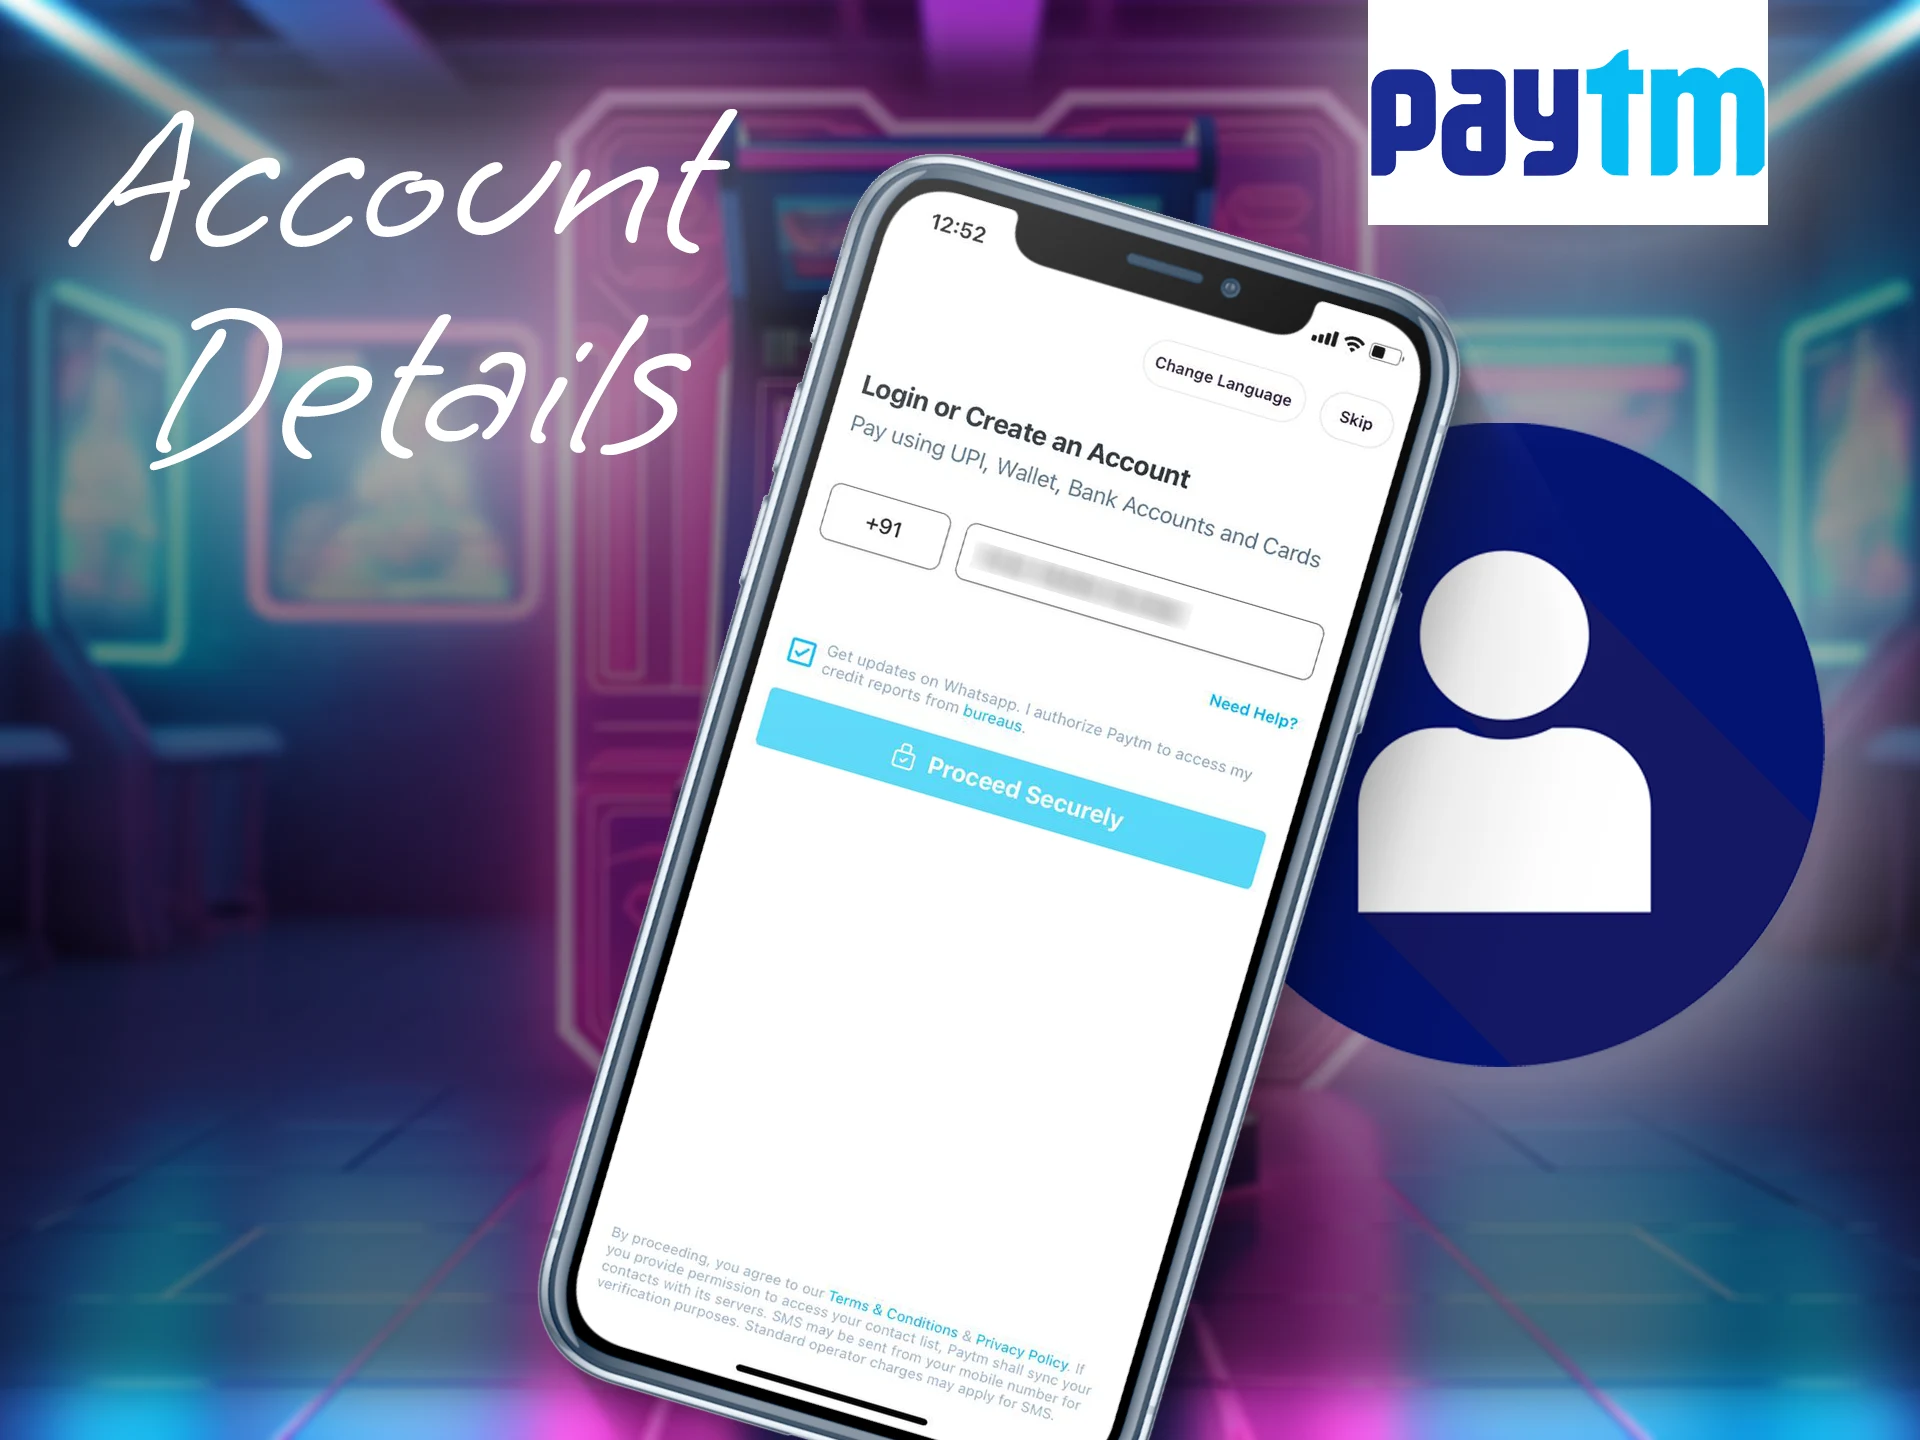 Register an account on the Paytm app.